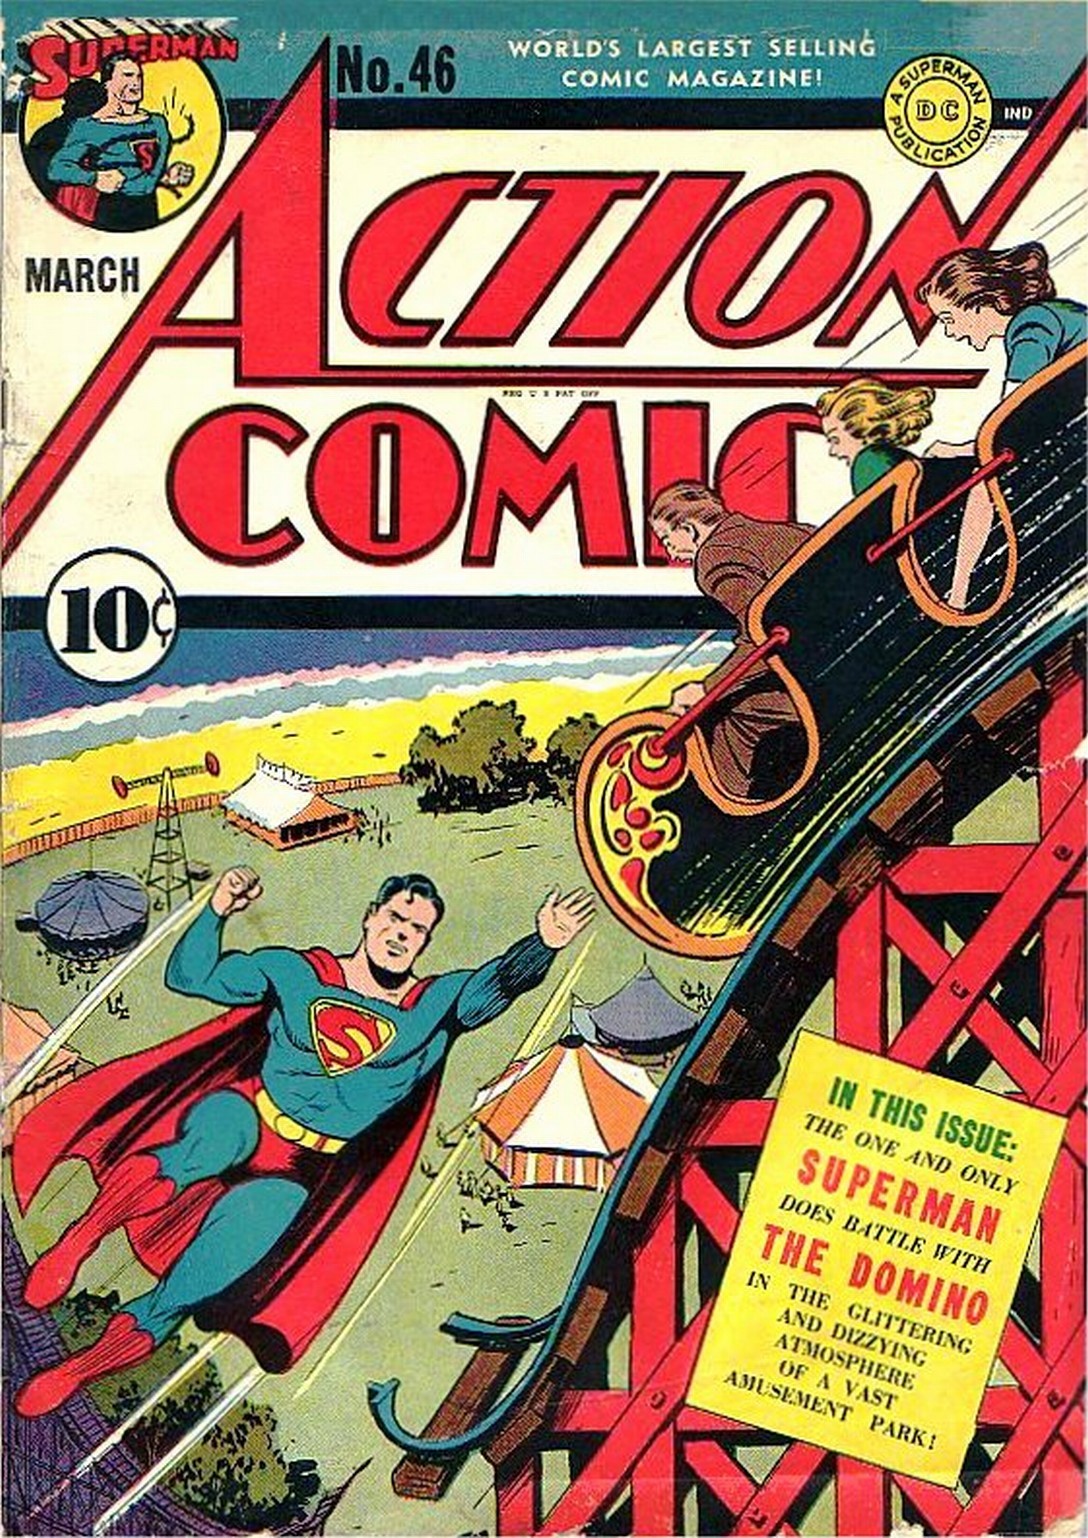 Amazing Action Comics Pictures & Backgrounds